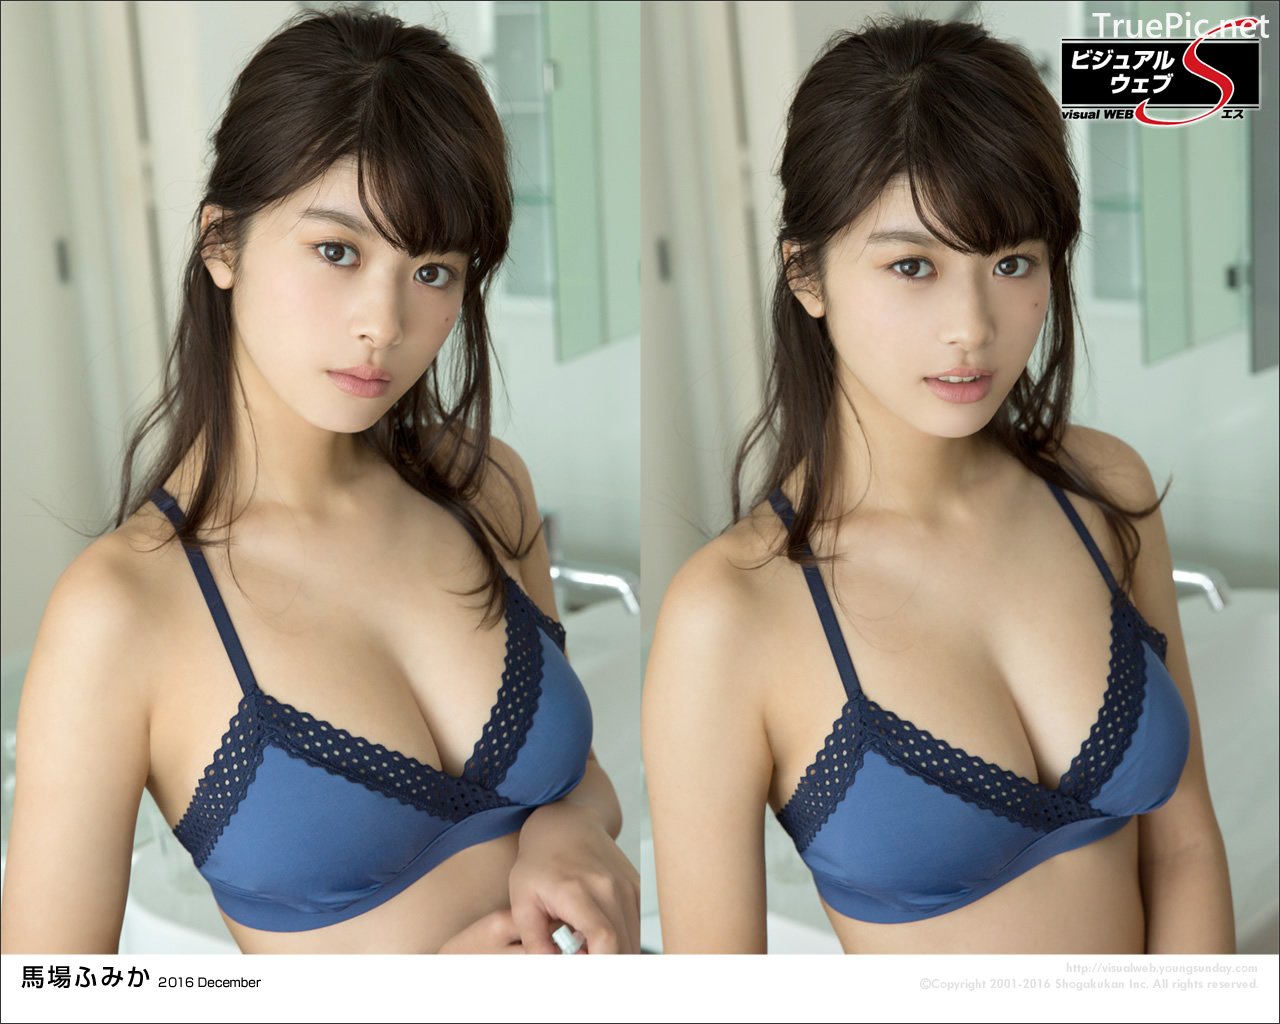 Japanese Actress And Model - Fumika Baba - YS Web Vol.729 - TruePic.net - Picture-107